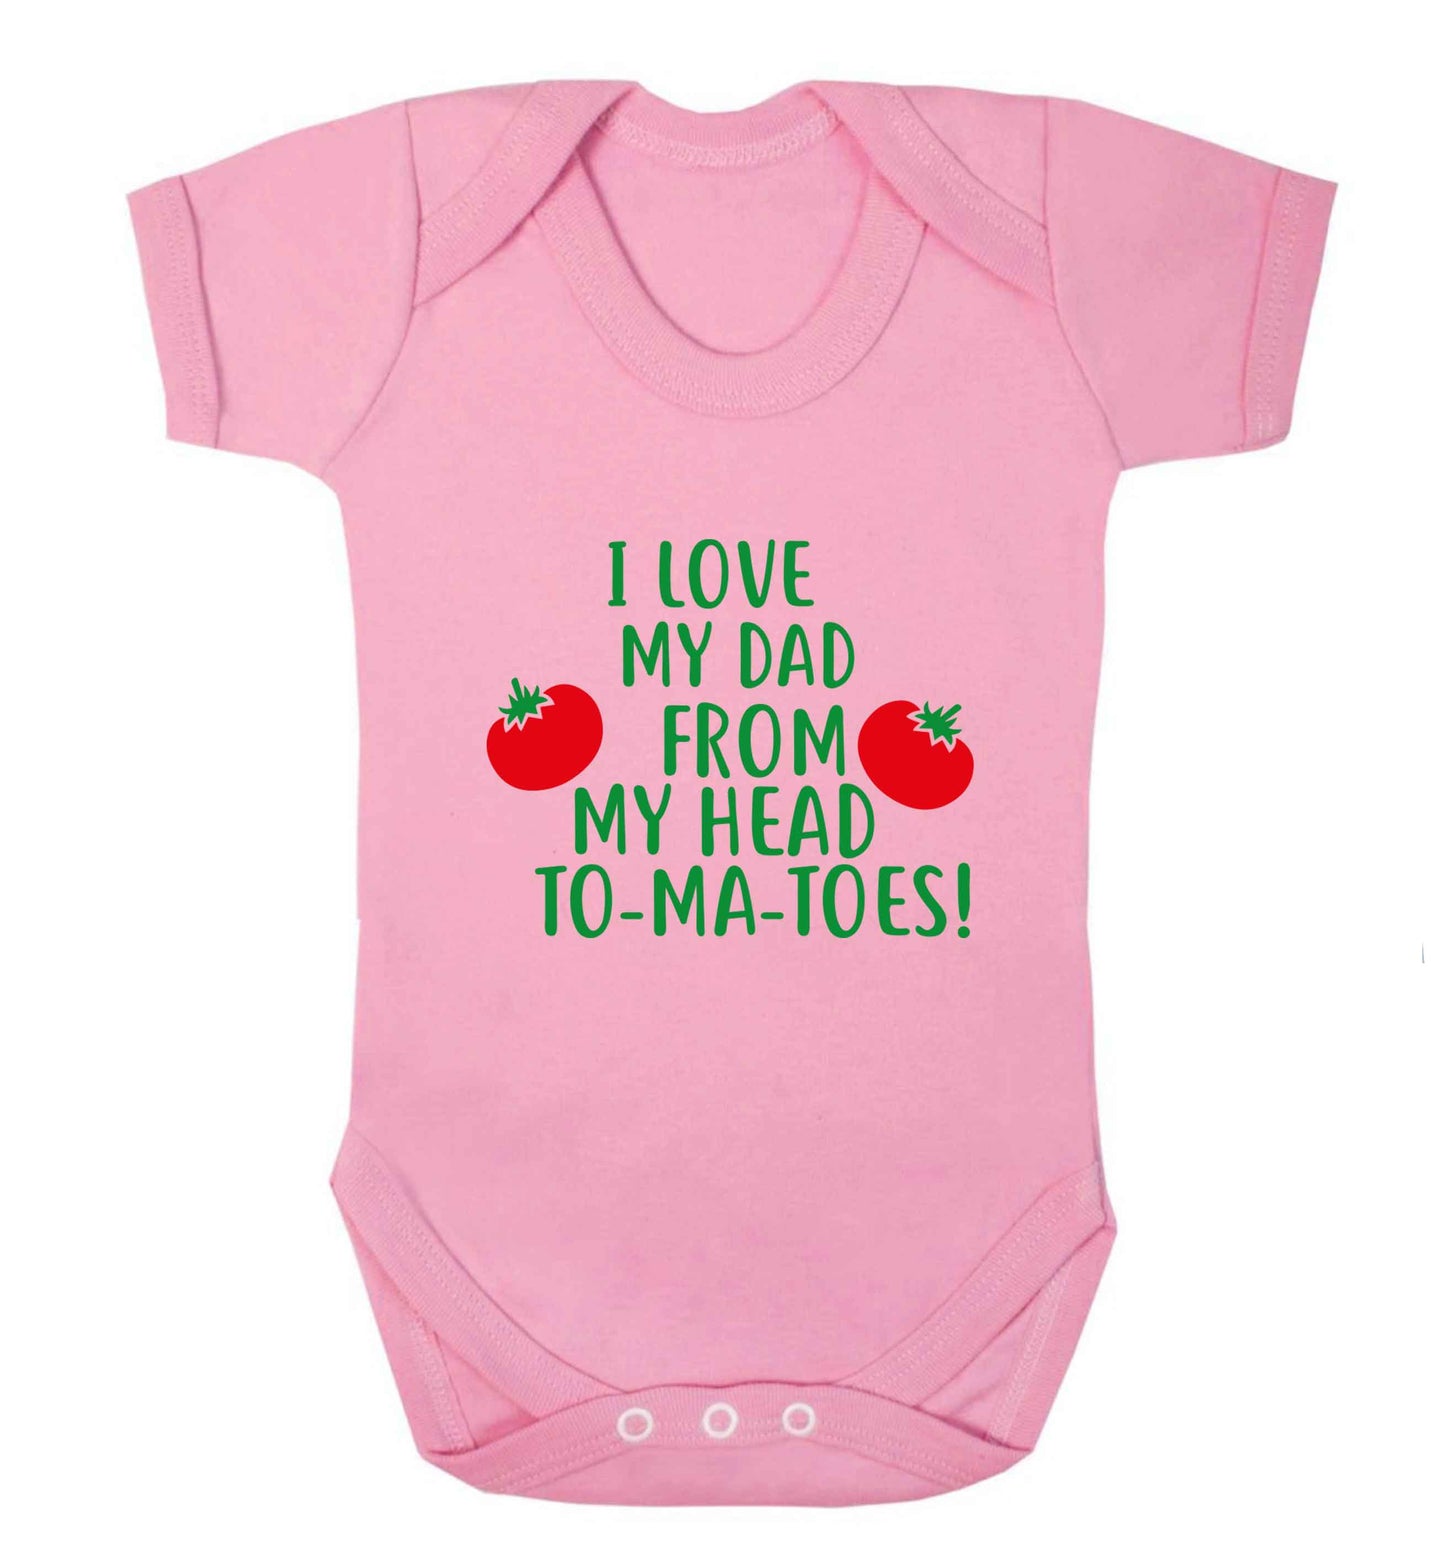 I love my dad from my head to-ma-toes baby vest pale pink 18-24 months